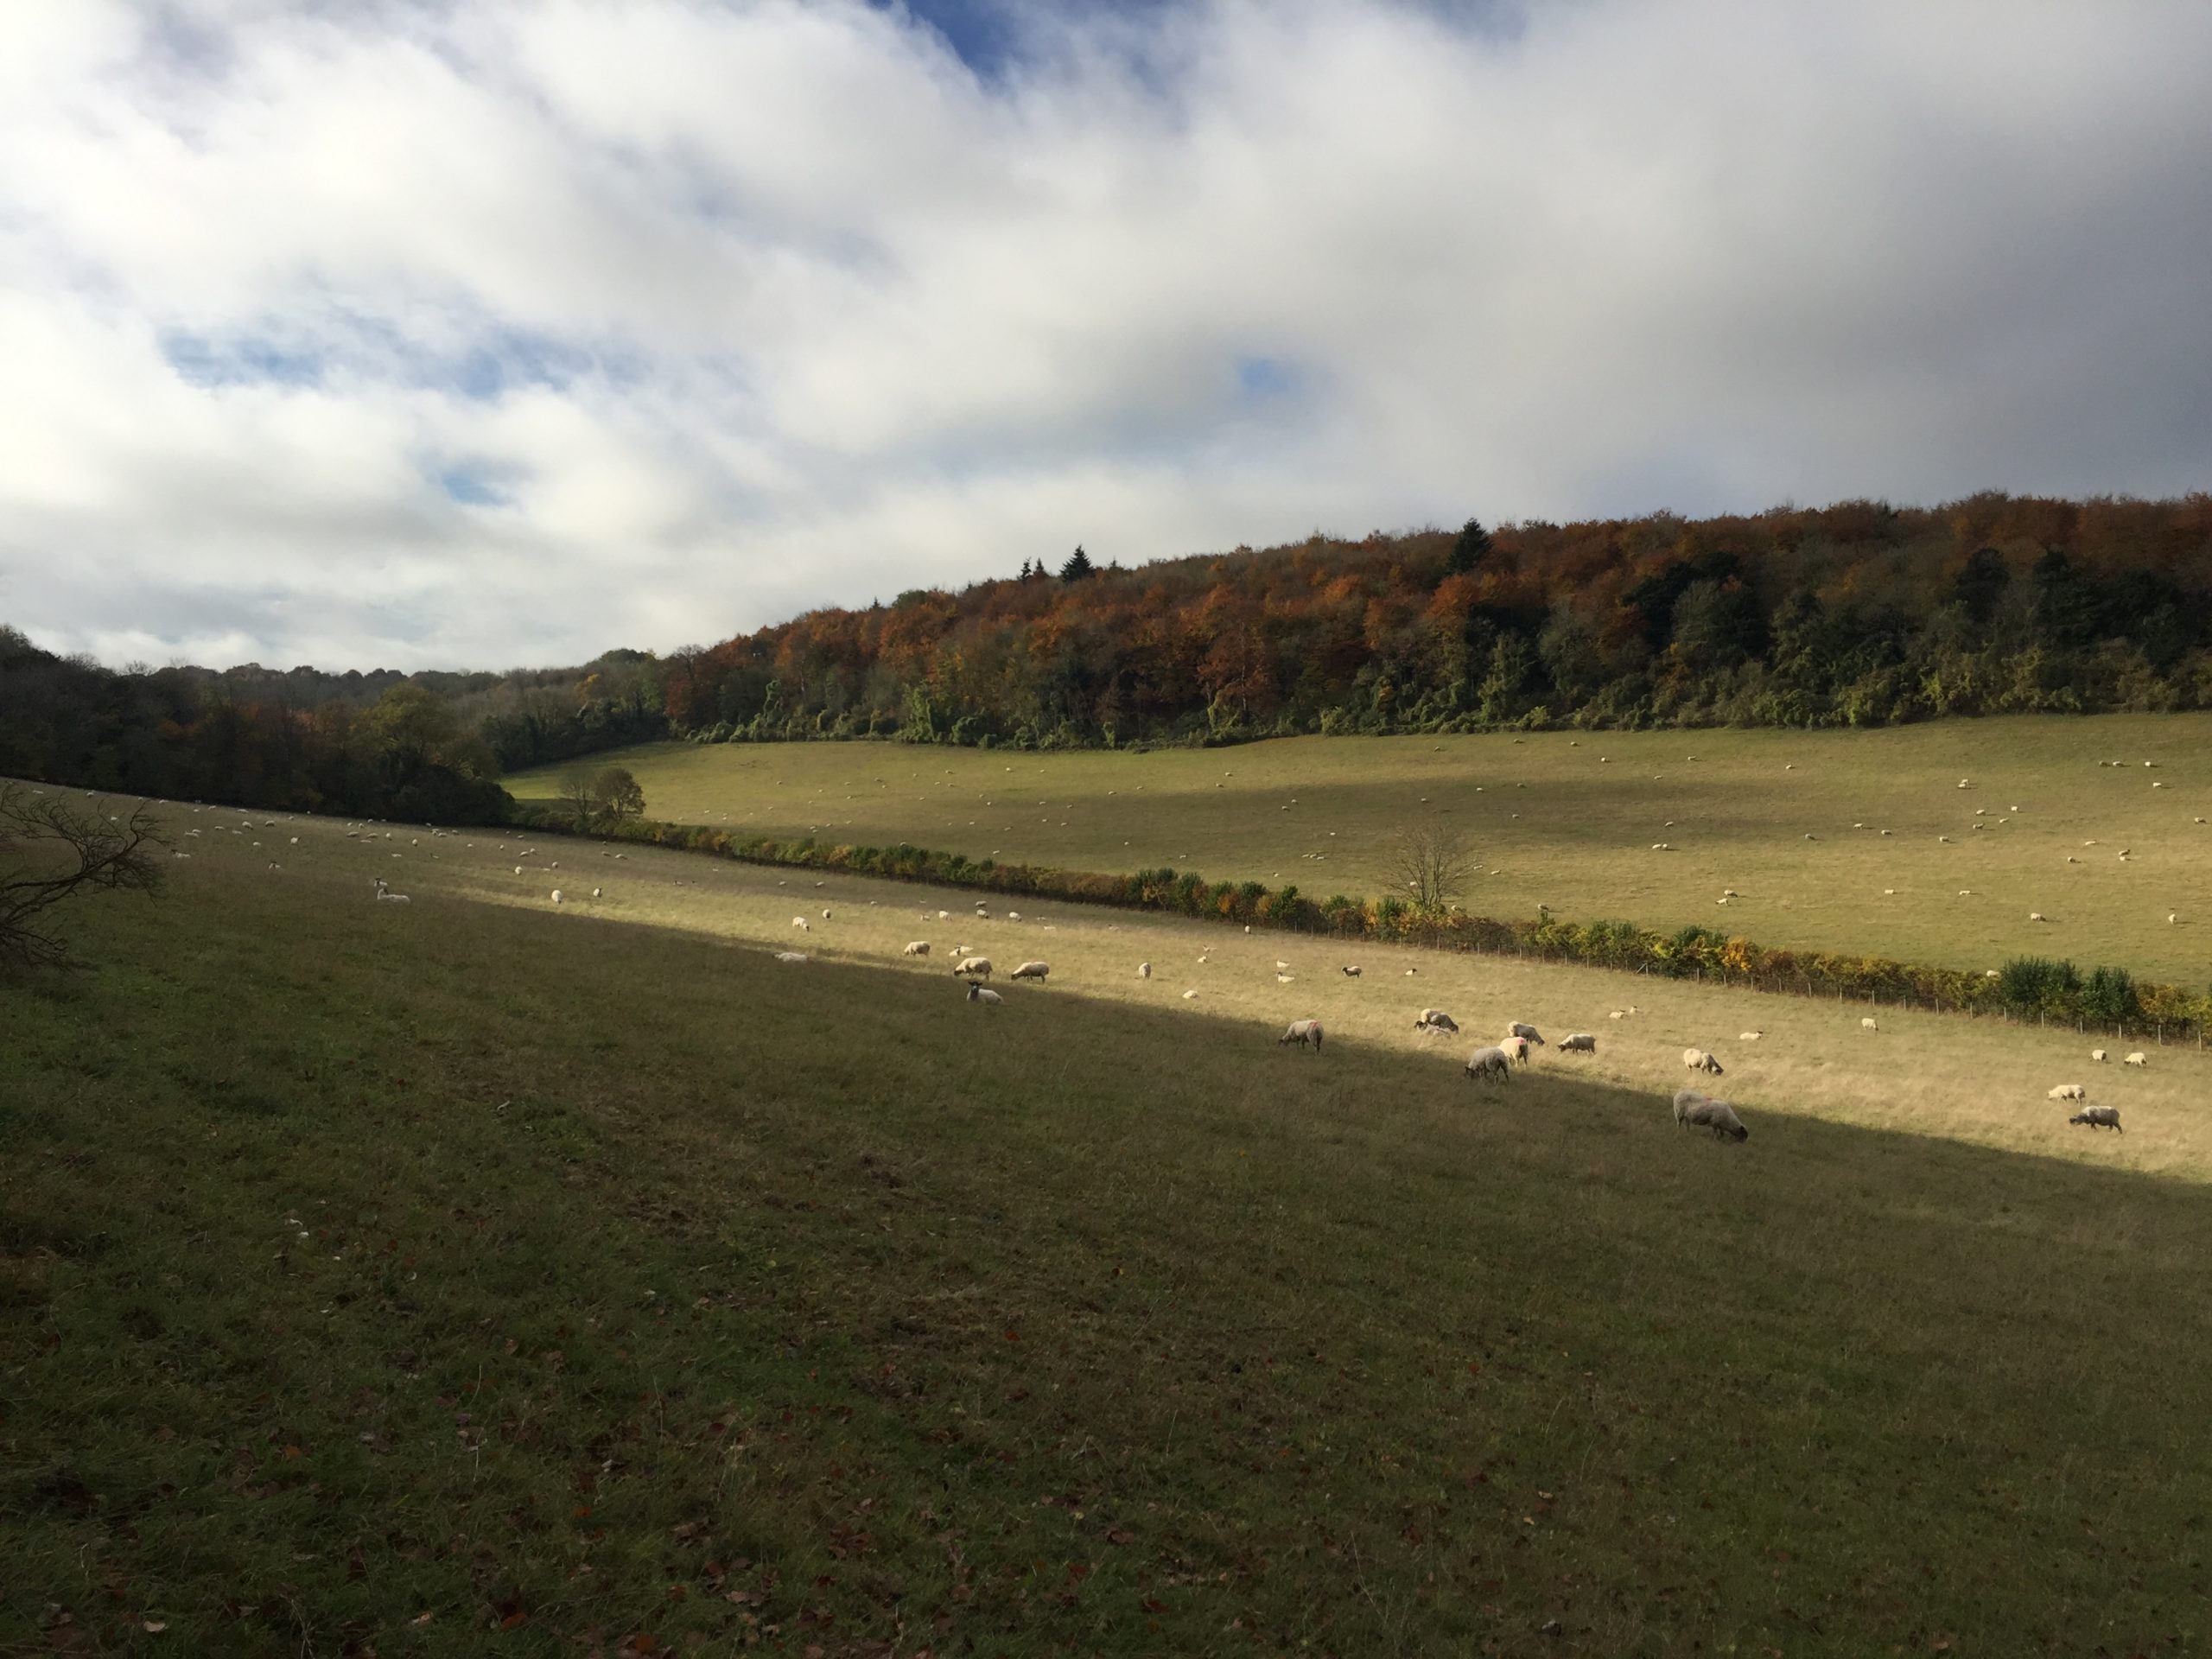 Sheep grazing in field with woodland behind